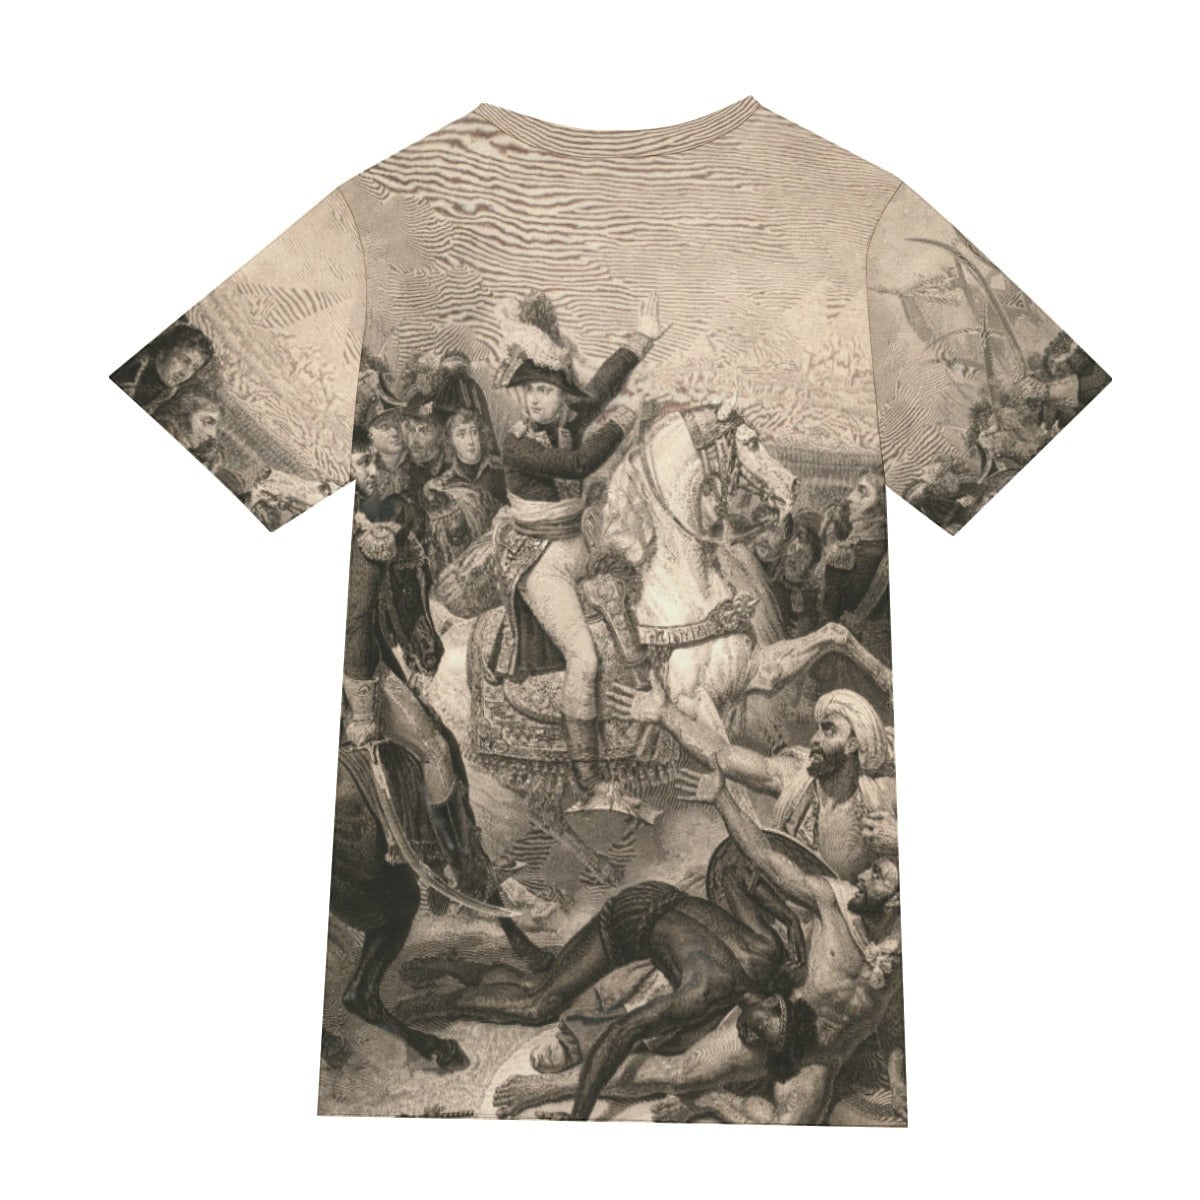 Napoleon at The Battle of The Pyramids T-Shirt